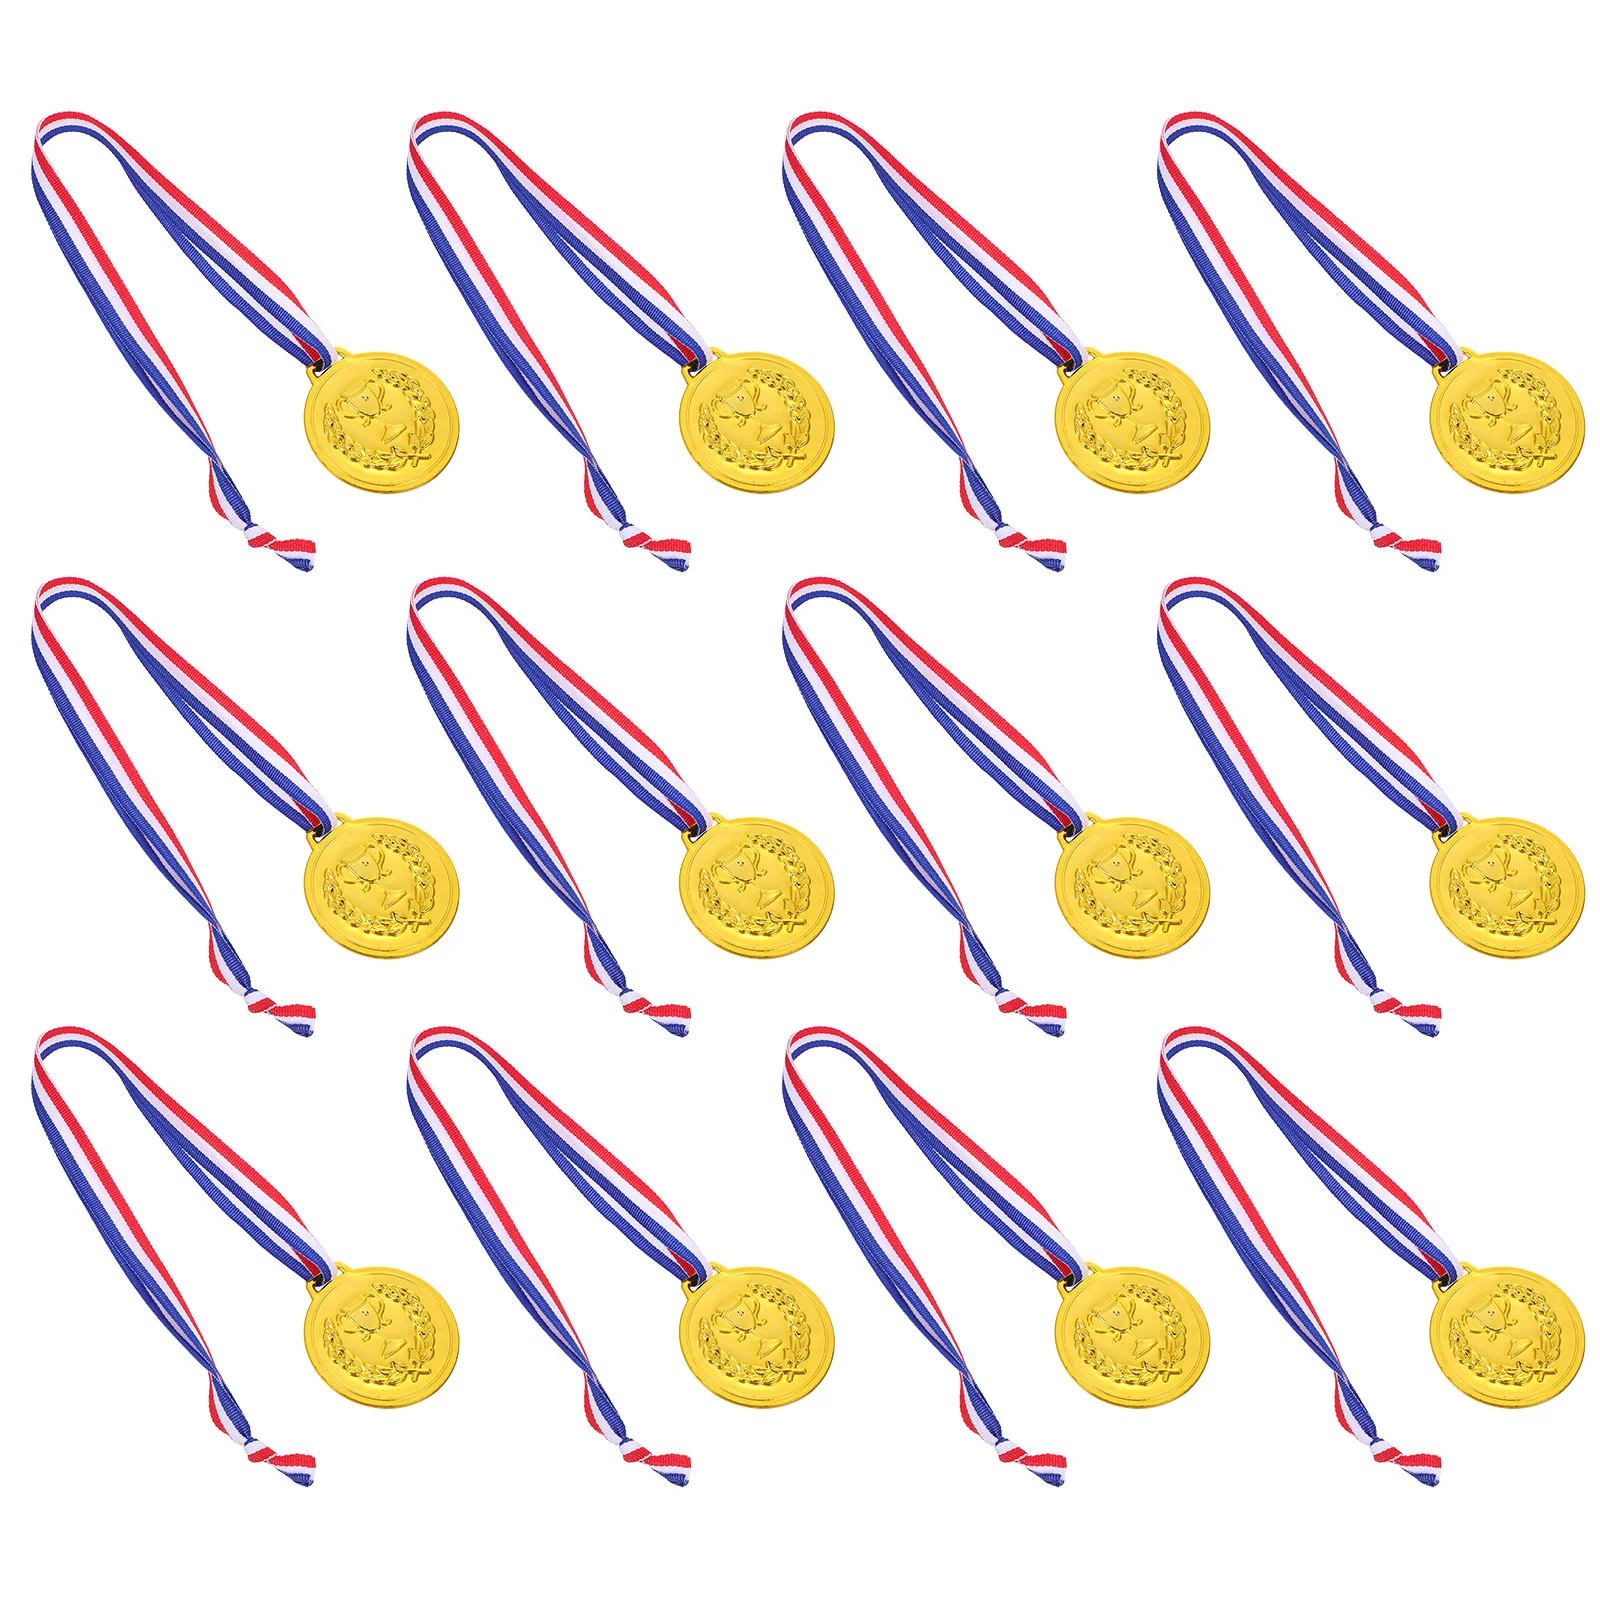 

12 Pcs Childrens Toys Children's Medal Medals for Awards Kids The Game Sports Competition Encouragement